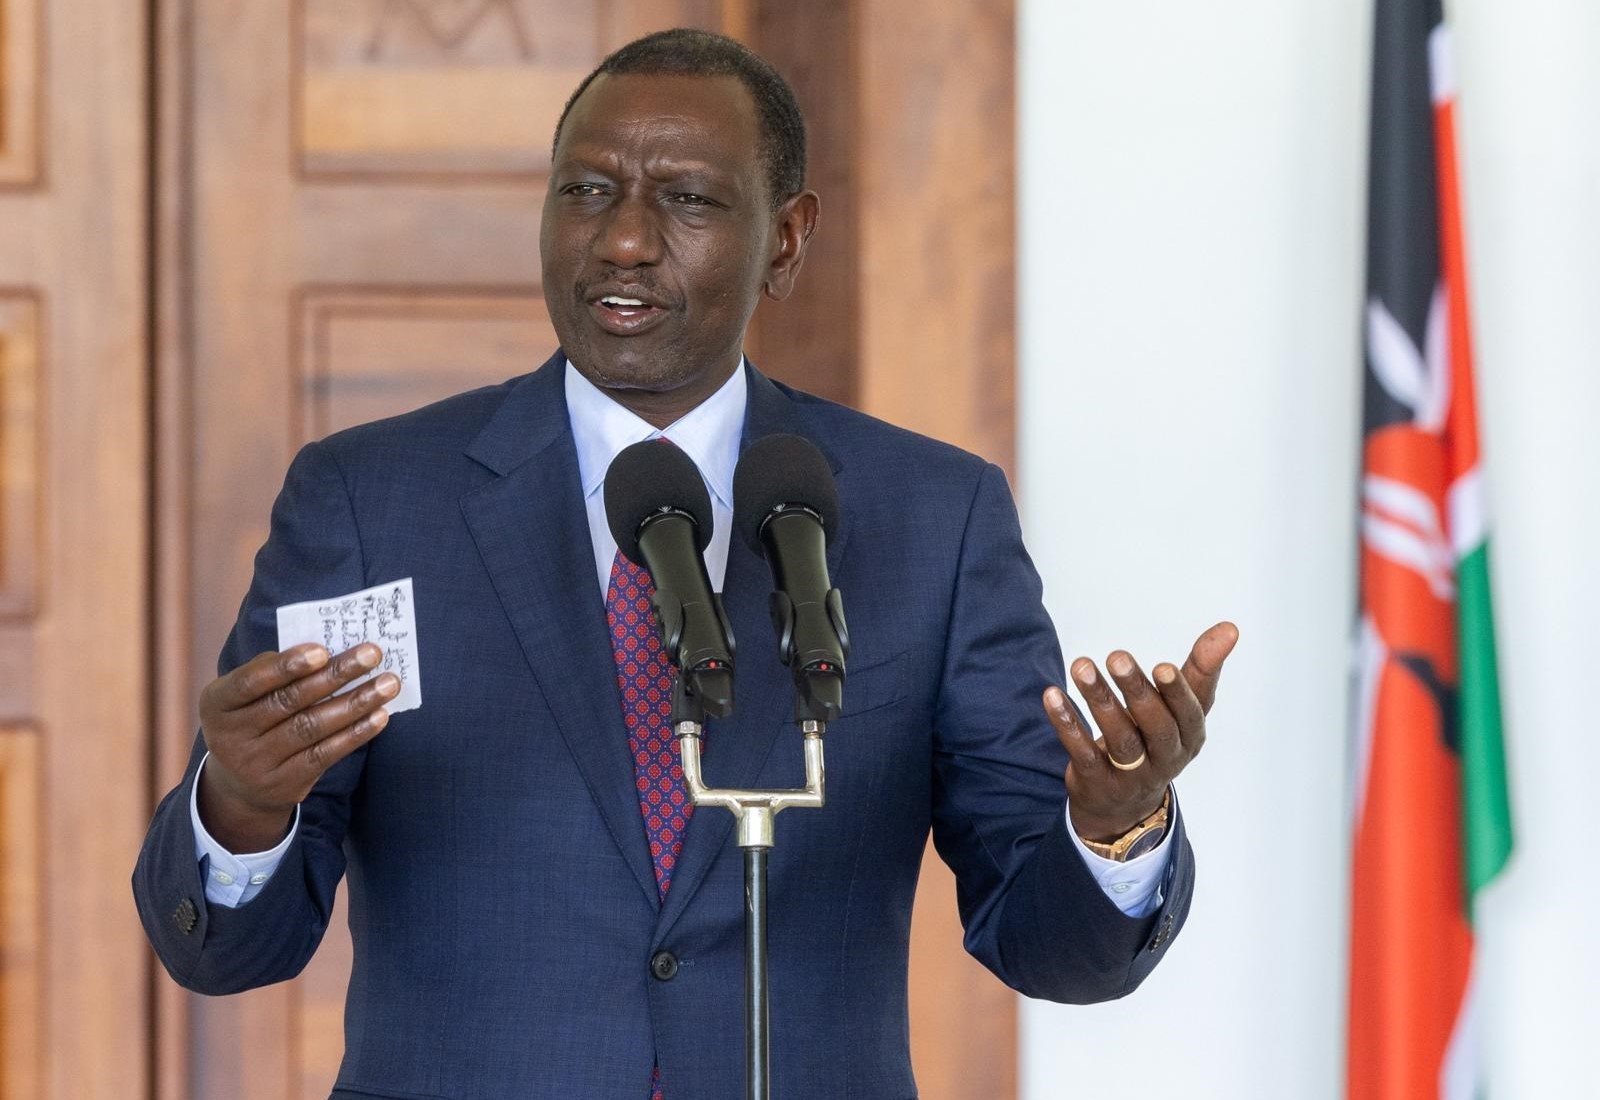 President Ruto calls for G7 support in debt relief, climate positive growth in Africa